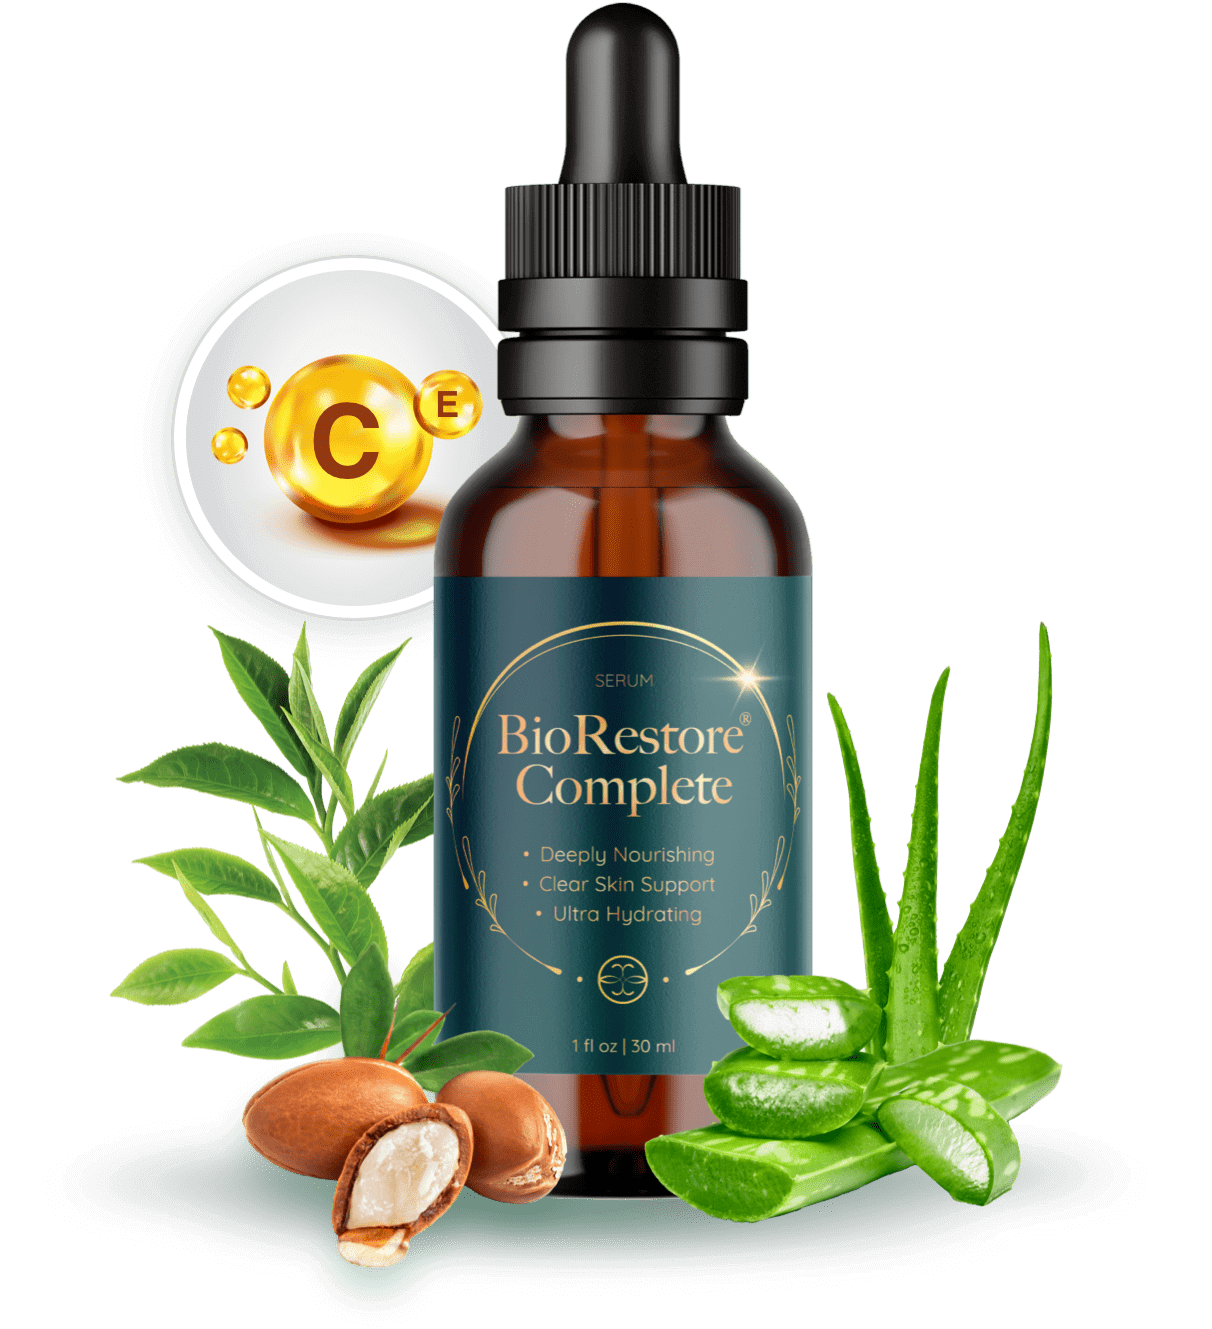 BioRestore Complete natural ingredients for healthy and glowing skin